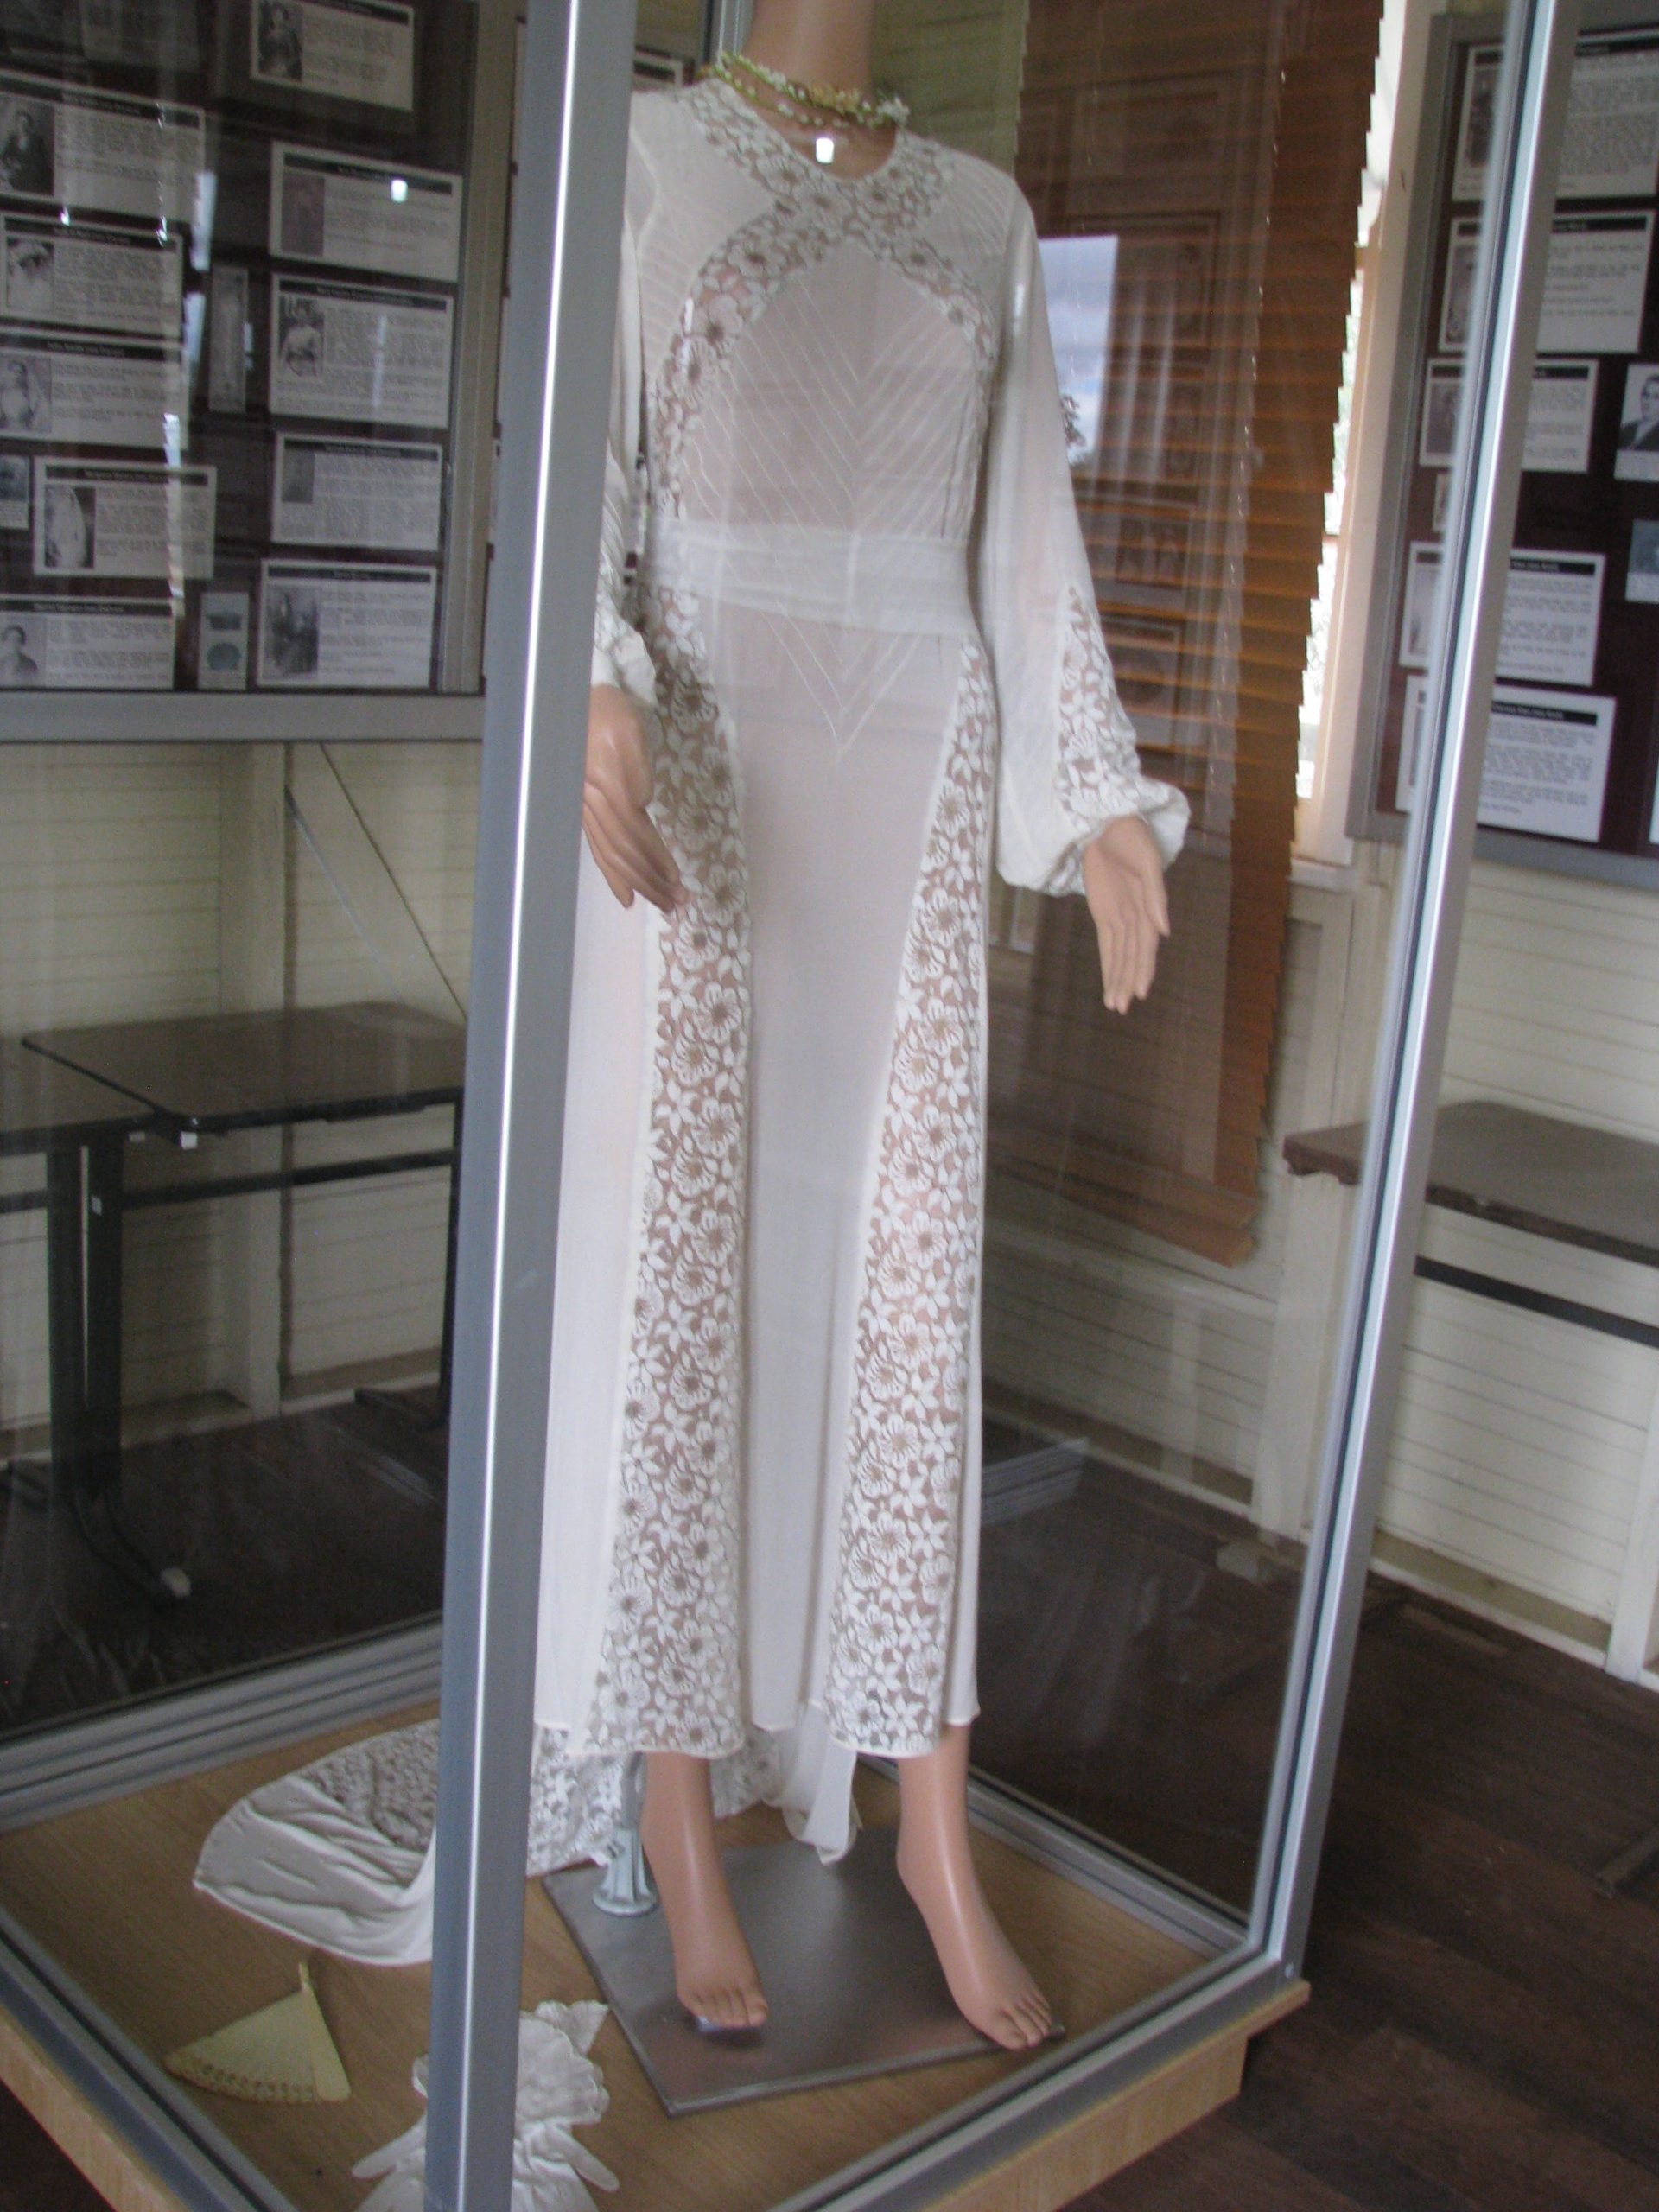 Wedding dress within the Rathdowney Visitor Information Centre